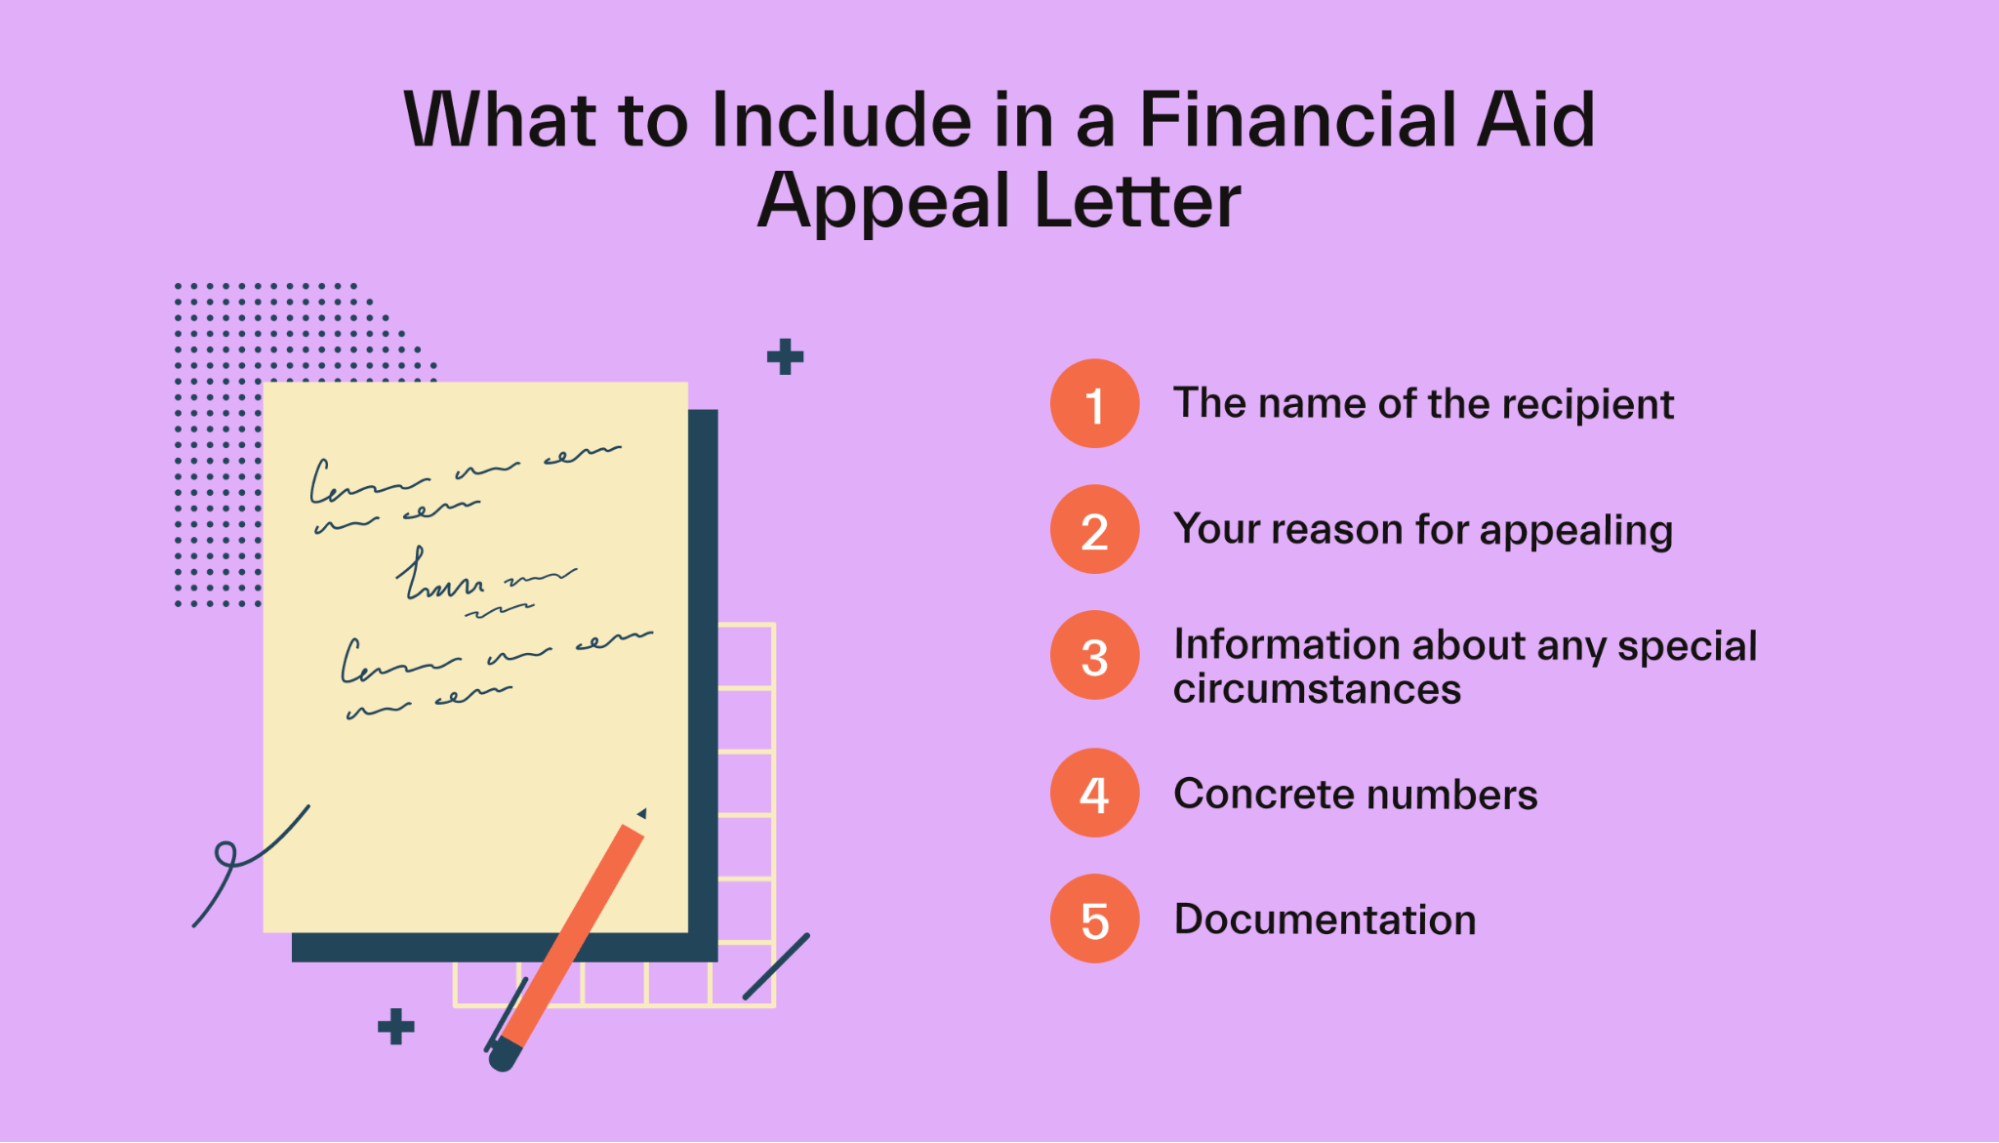 What to Include in a Financial Aid Appeal Letter